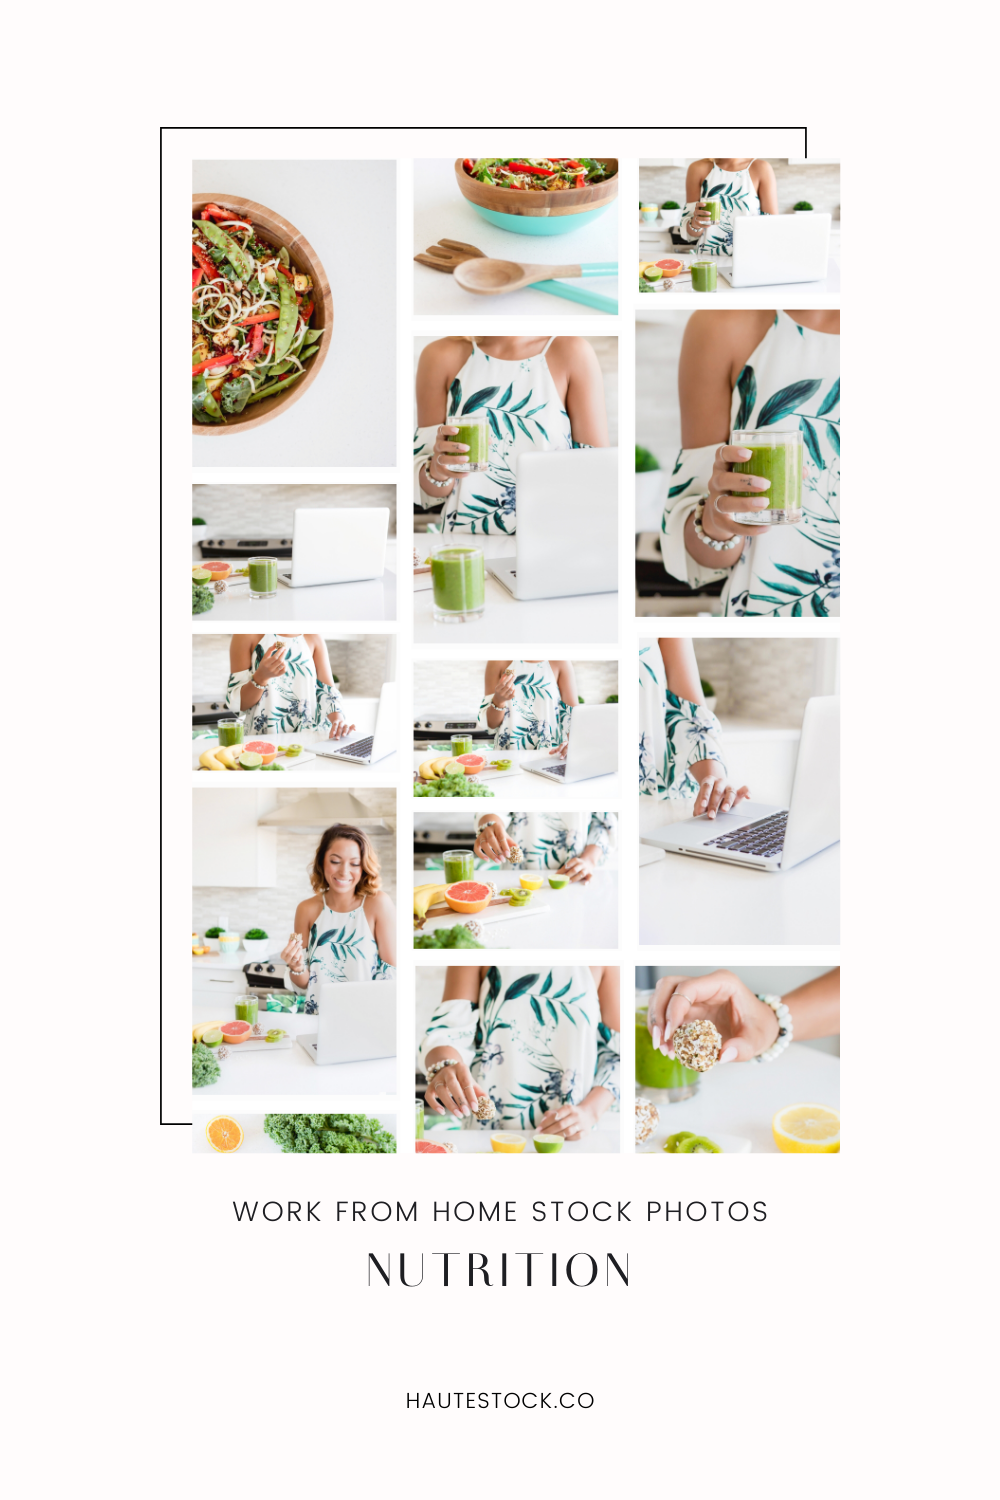 Home meals and work from home nutrition stock photos